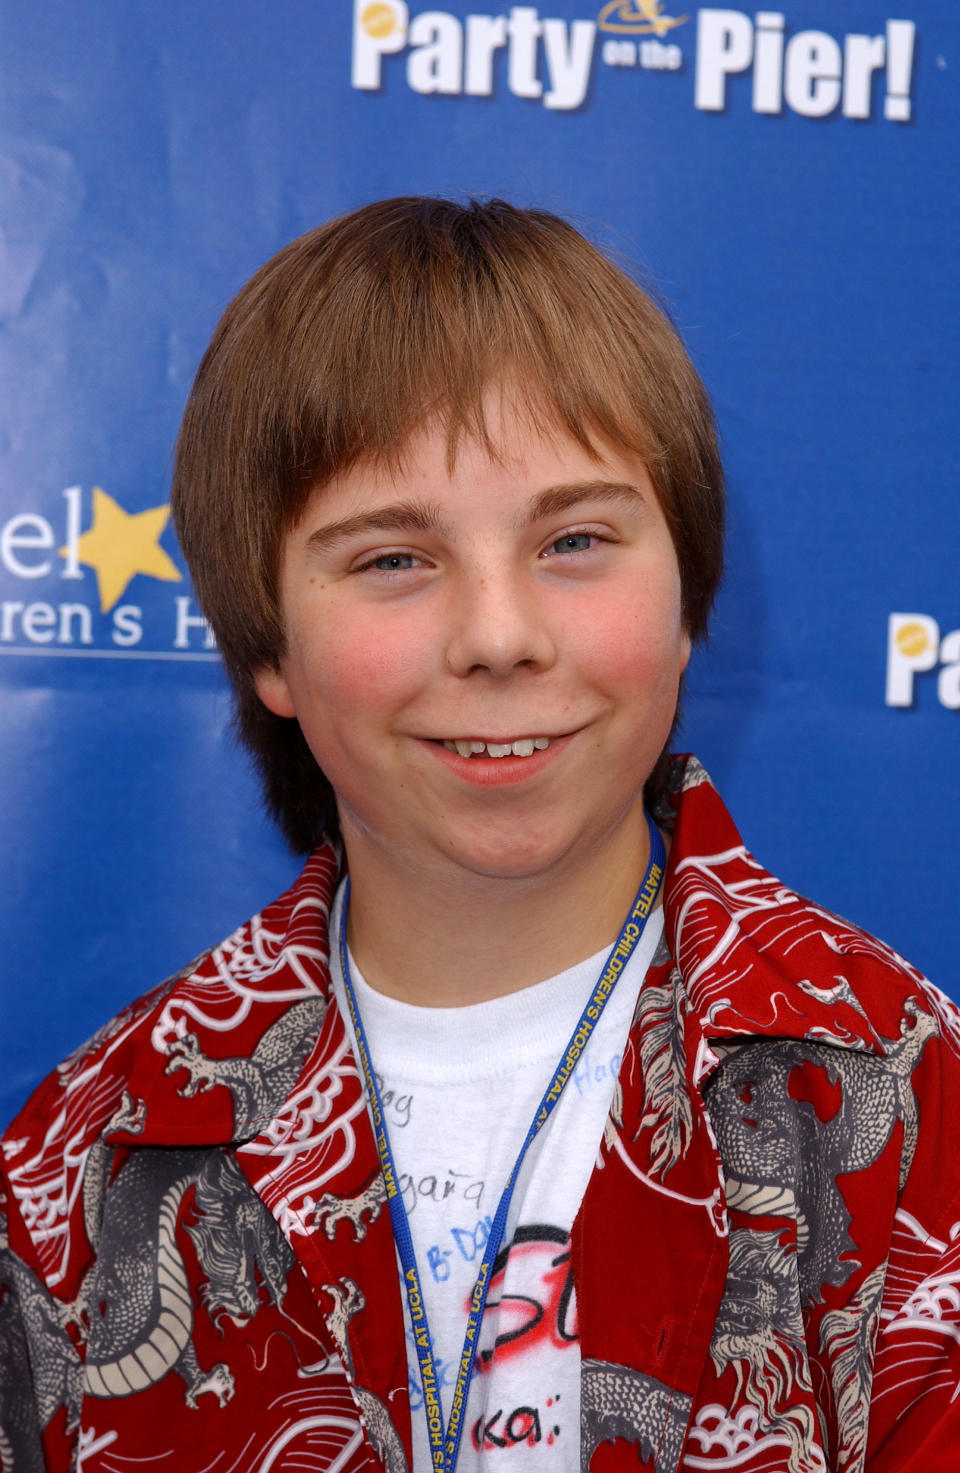 Steven Anthony Lawrence attends the 4th Annual "Party on the Pier" to aid the Mattel Children's Hospital at UCLA in 2003